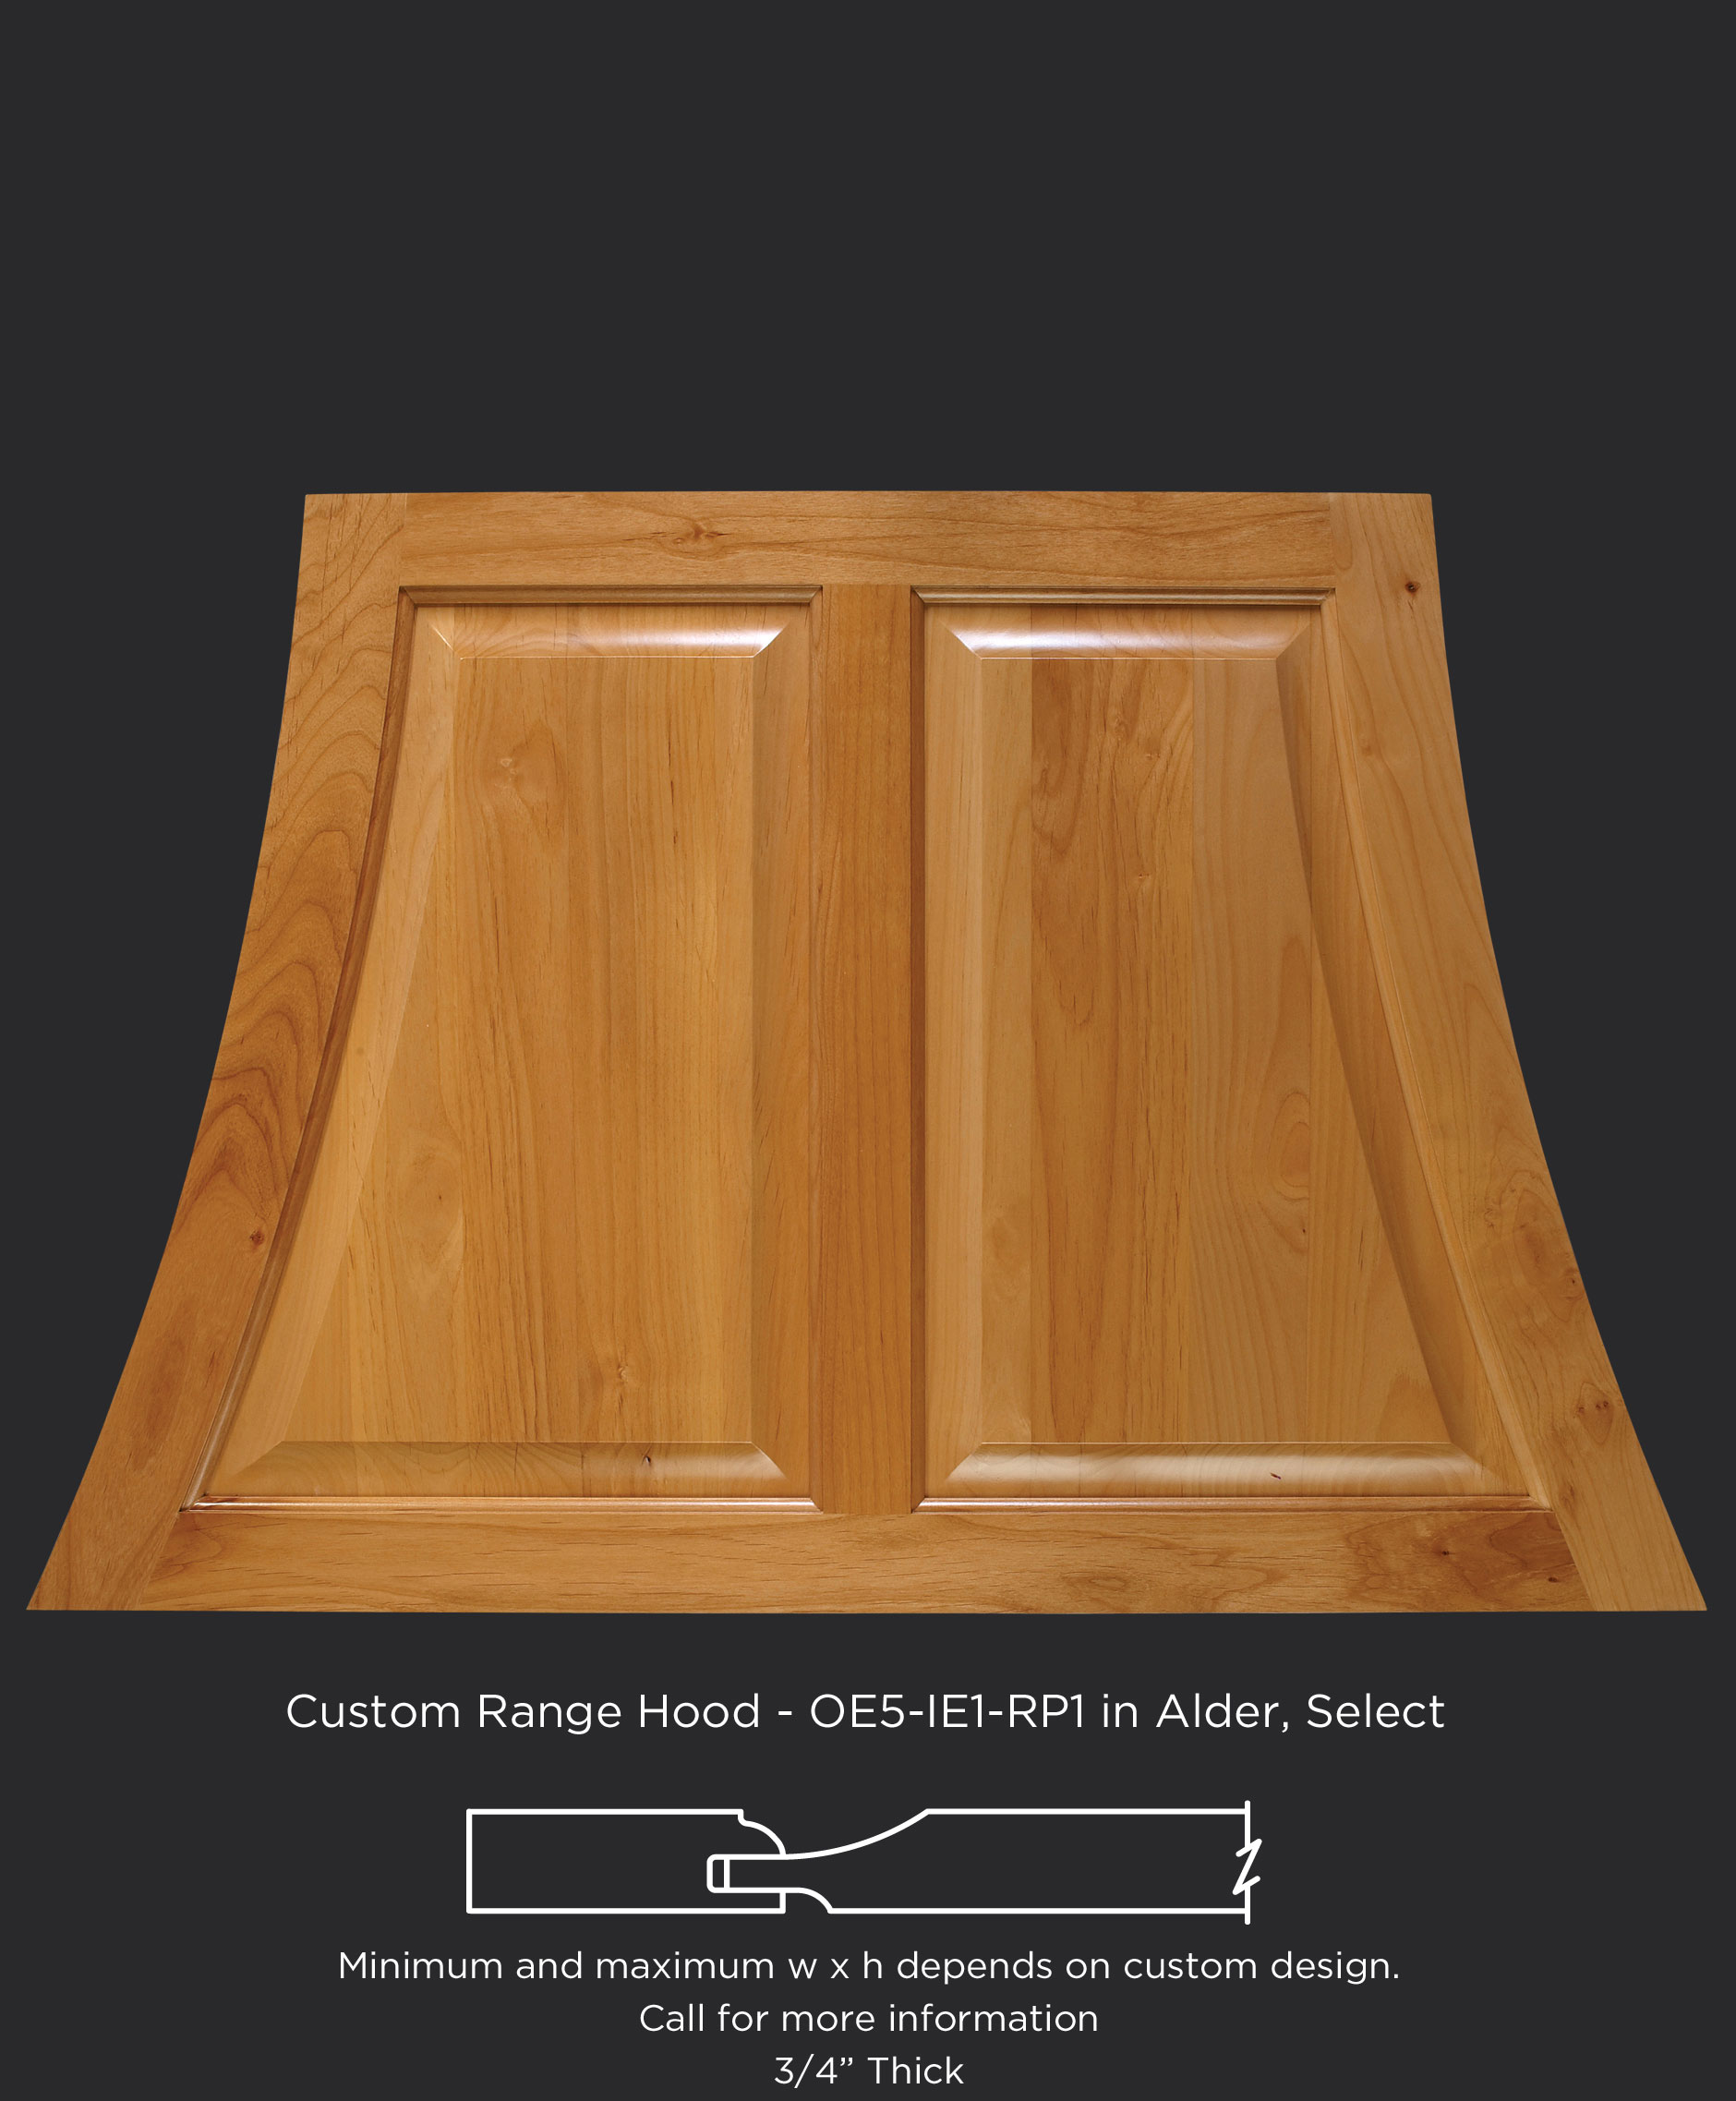 Wood range hood with center stile and OE5-IE1-RP1 in Alder, Select